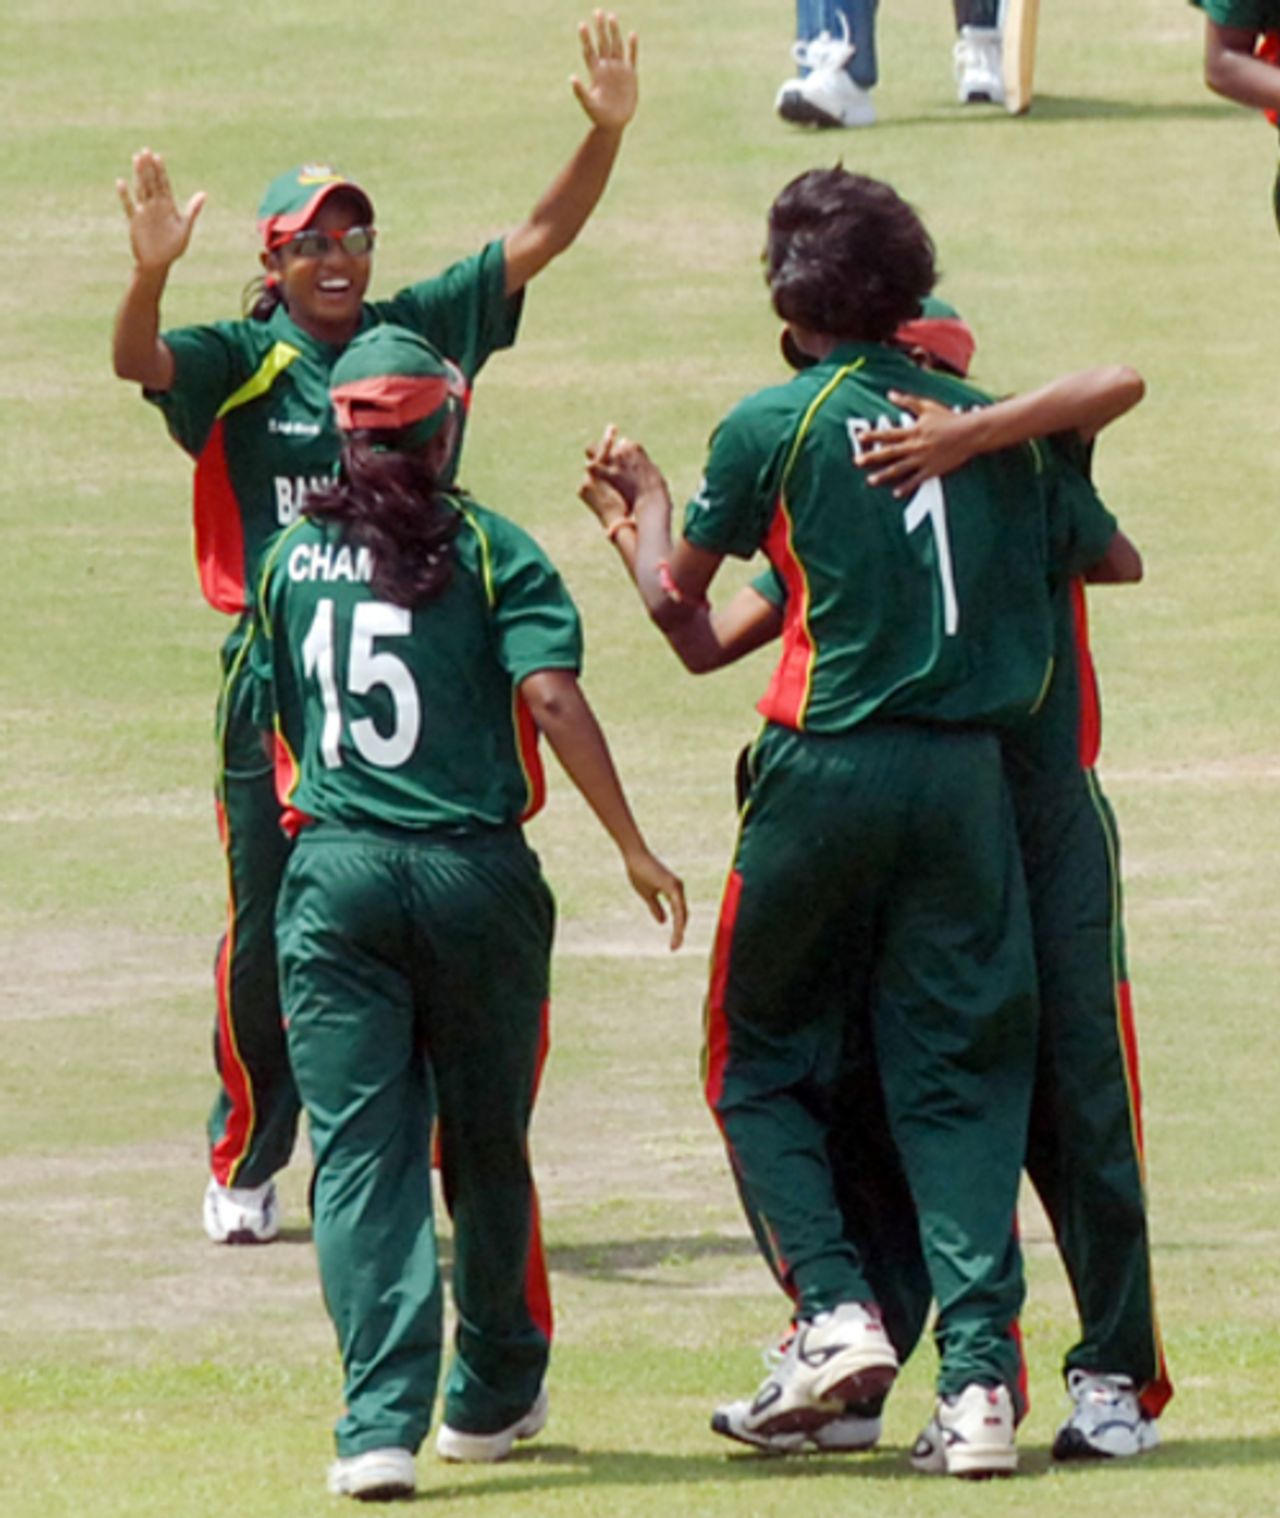 Panna Ghosh struck in her second over when she dismissed Dedunu Silva, Dambulla, Women's Asia Cup, May 5, 2008 